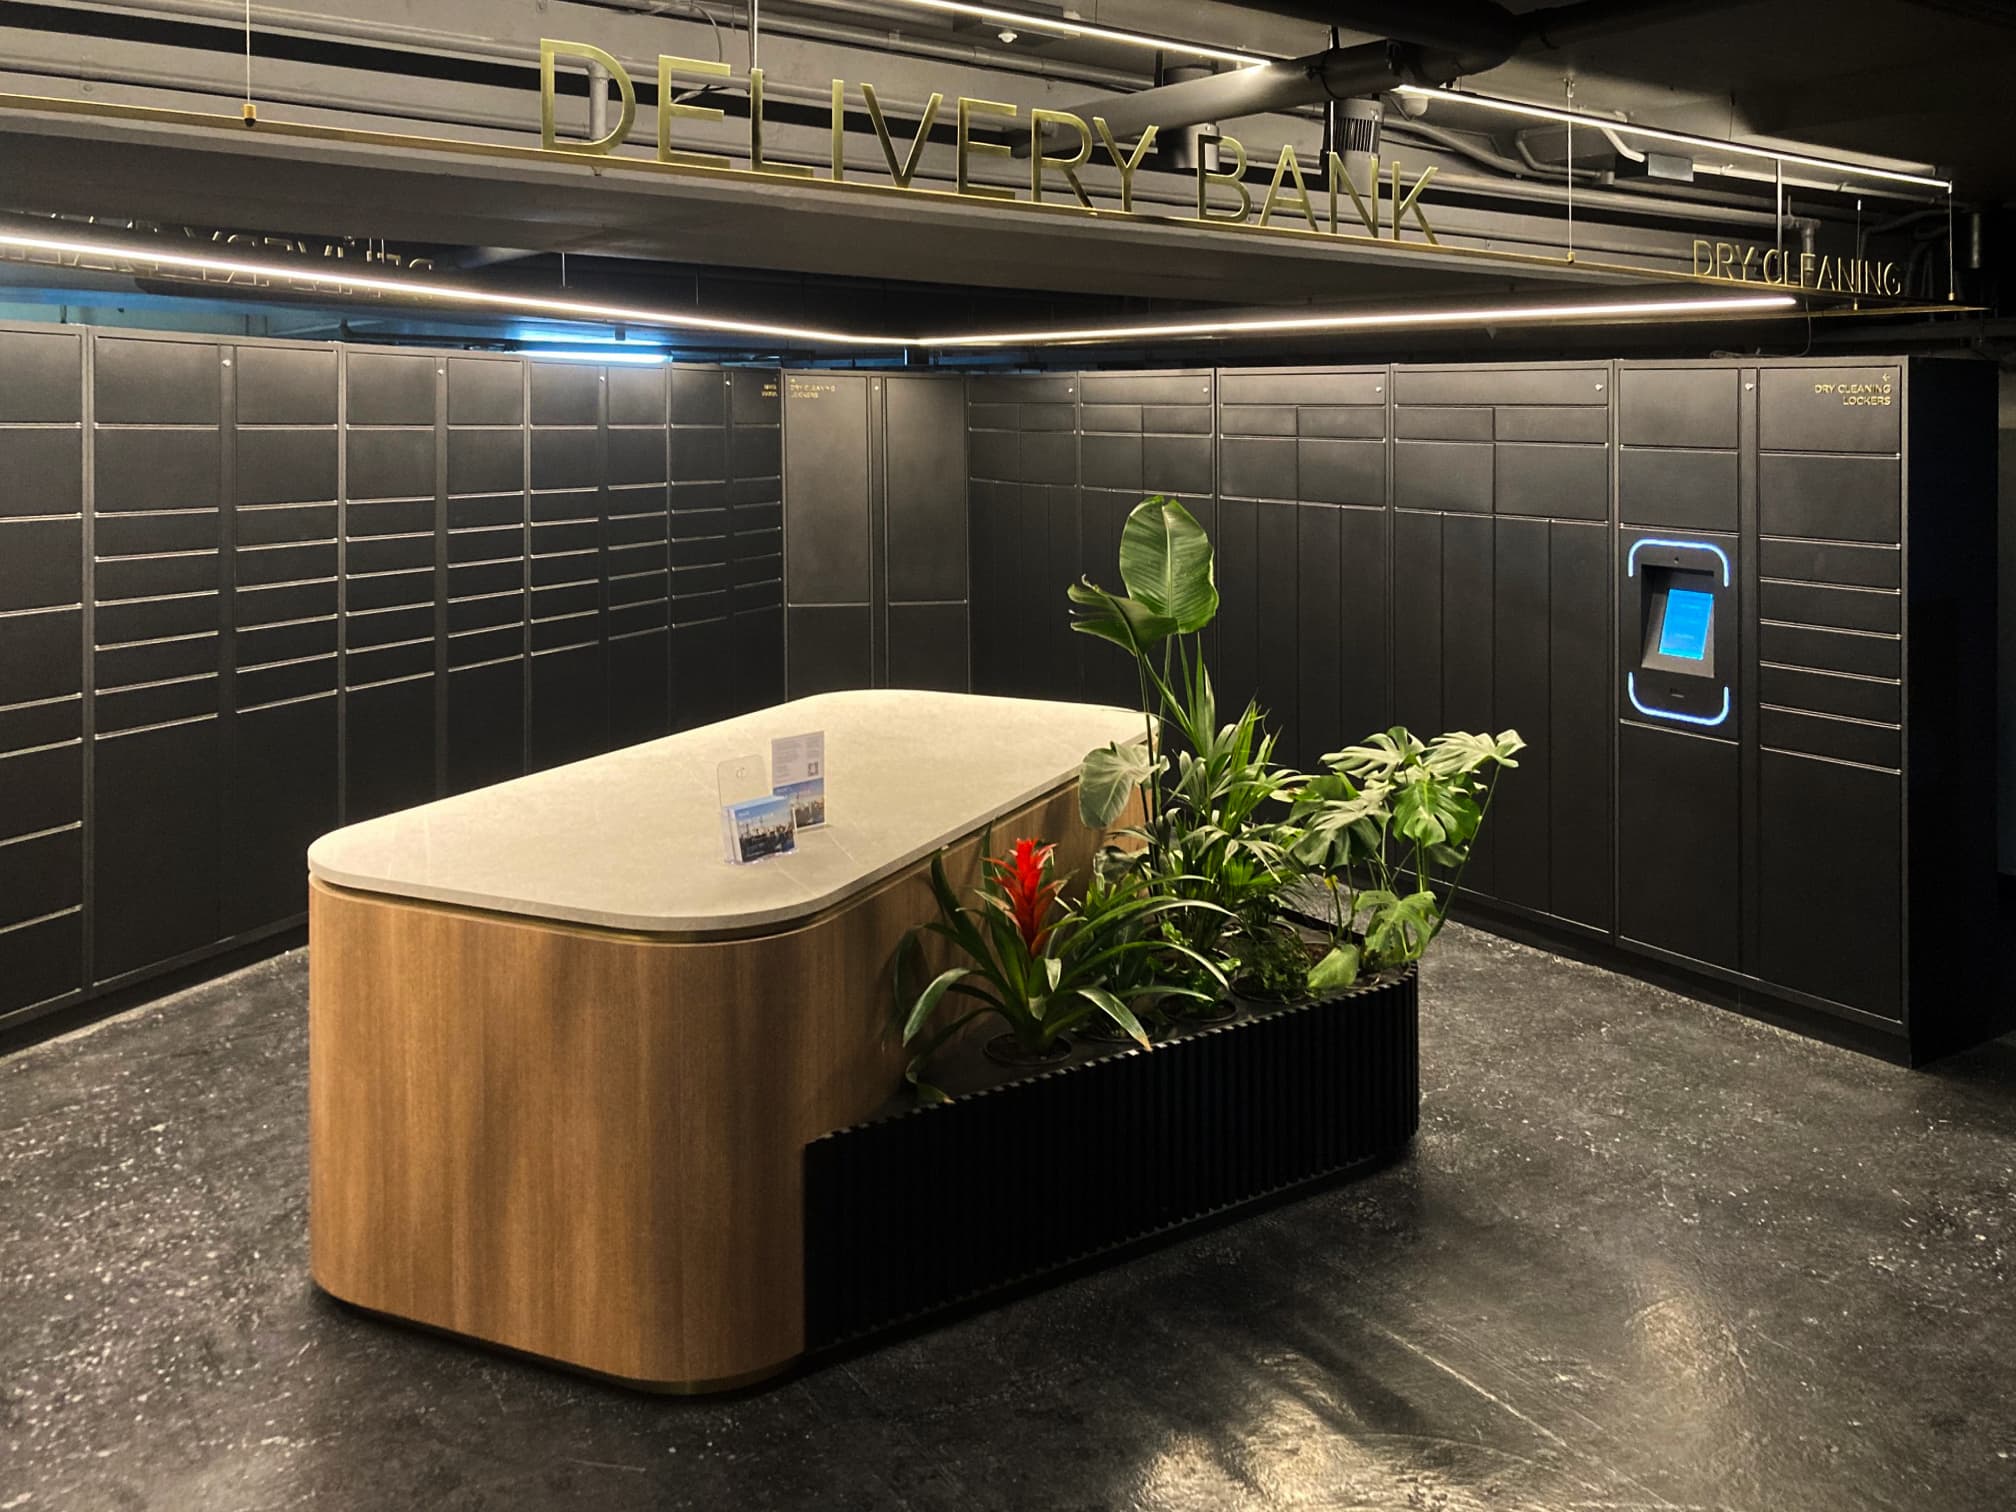 A modern parcel lockers for business station with a curved wooden counter and integrated planters, located in a dimly lit, gray tiled room.